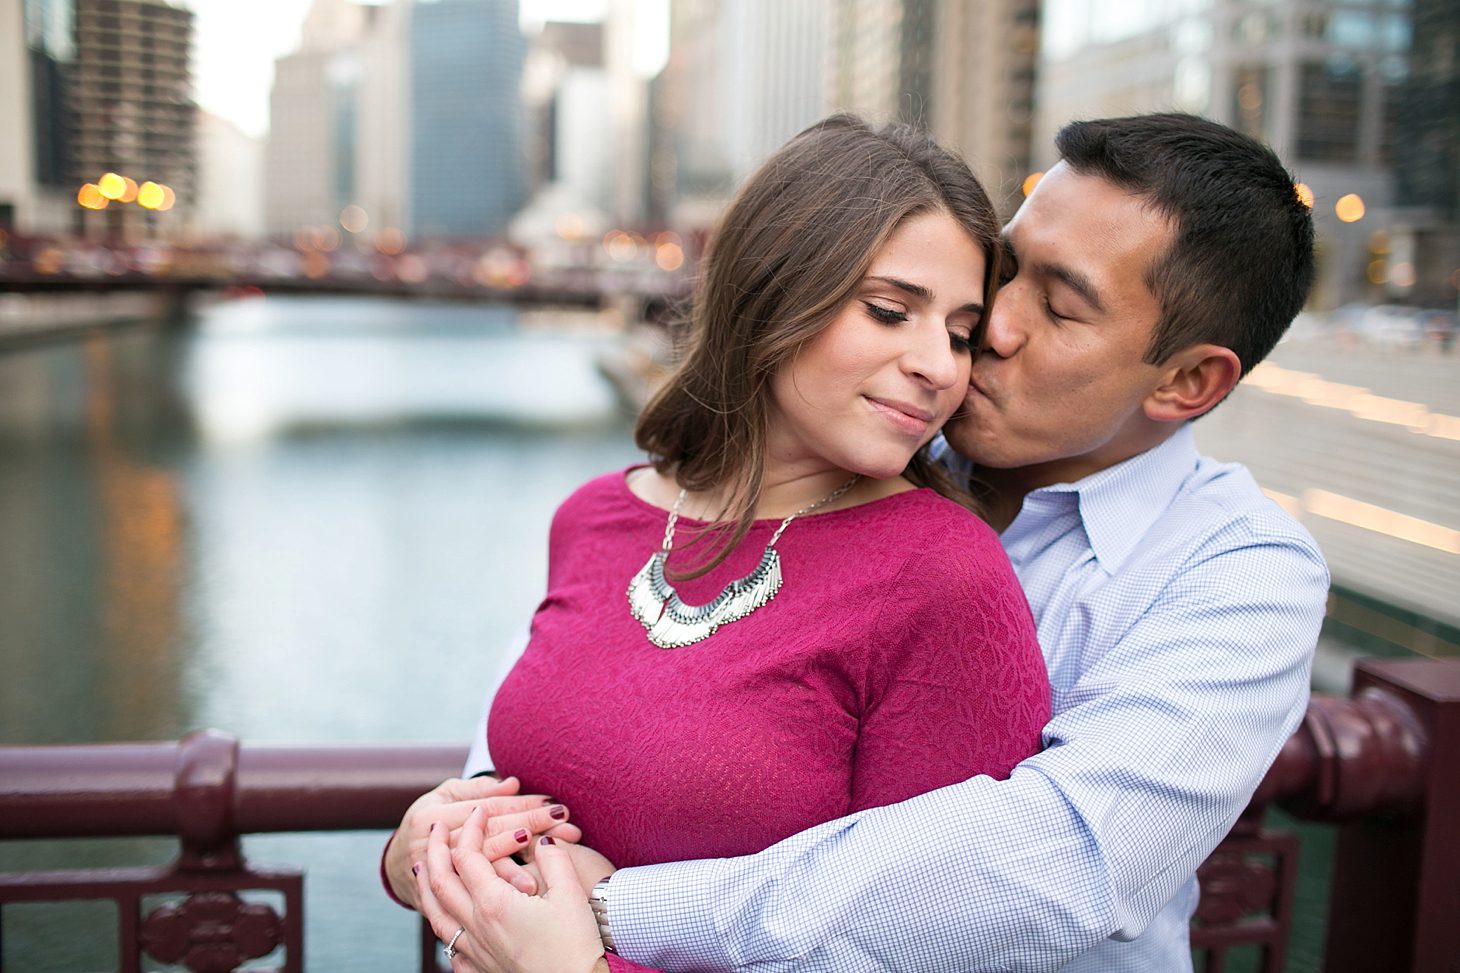 Downtown Chicago Engagement Photography by Christy Tyler Photography_0013